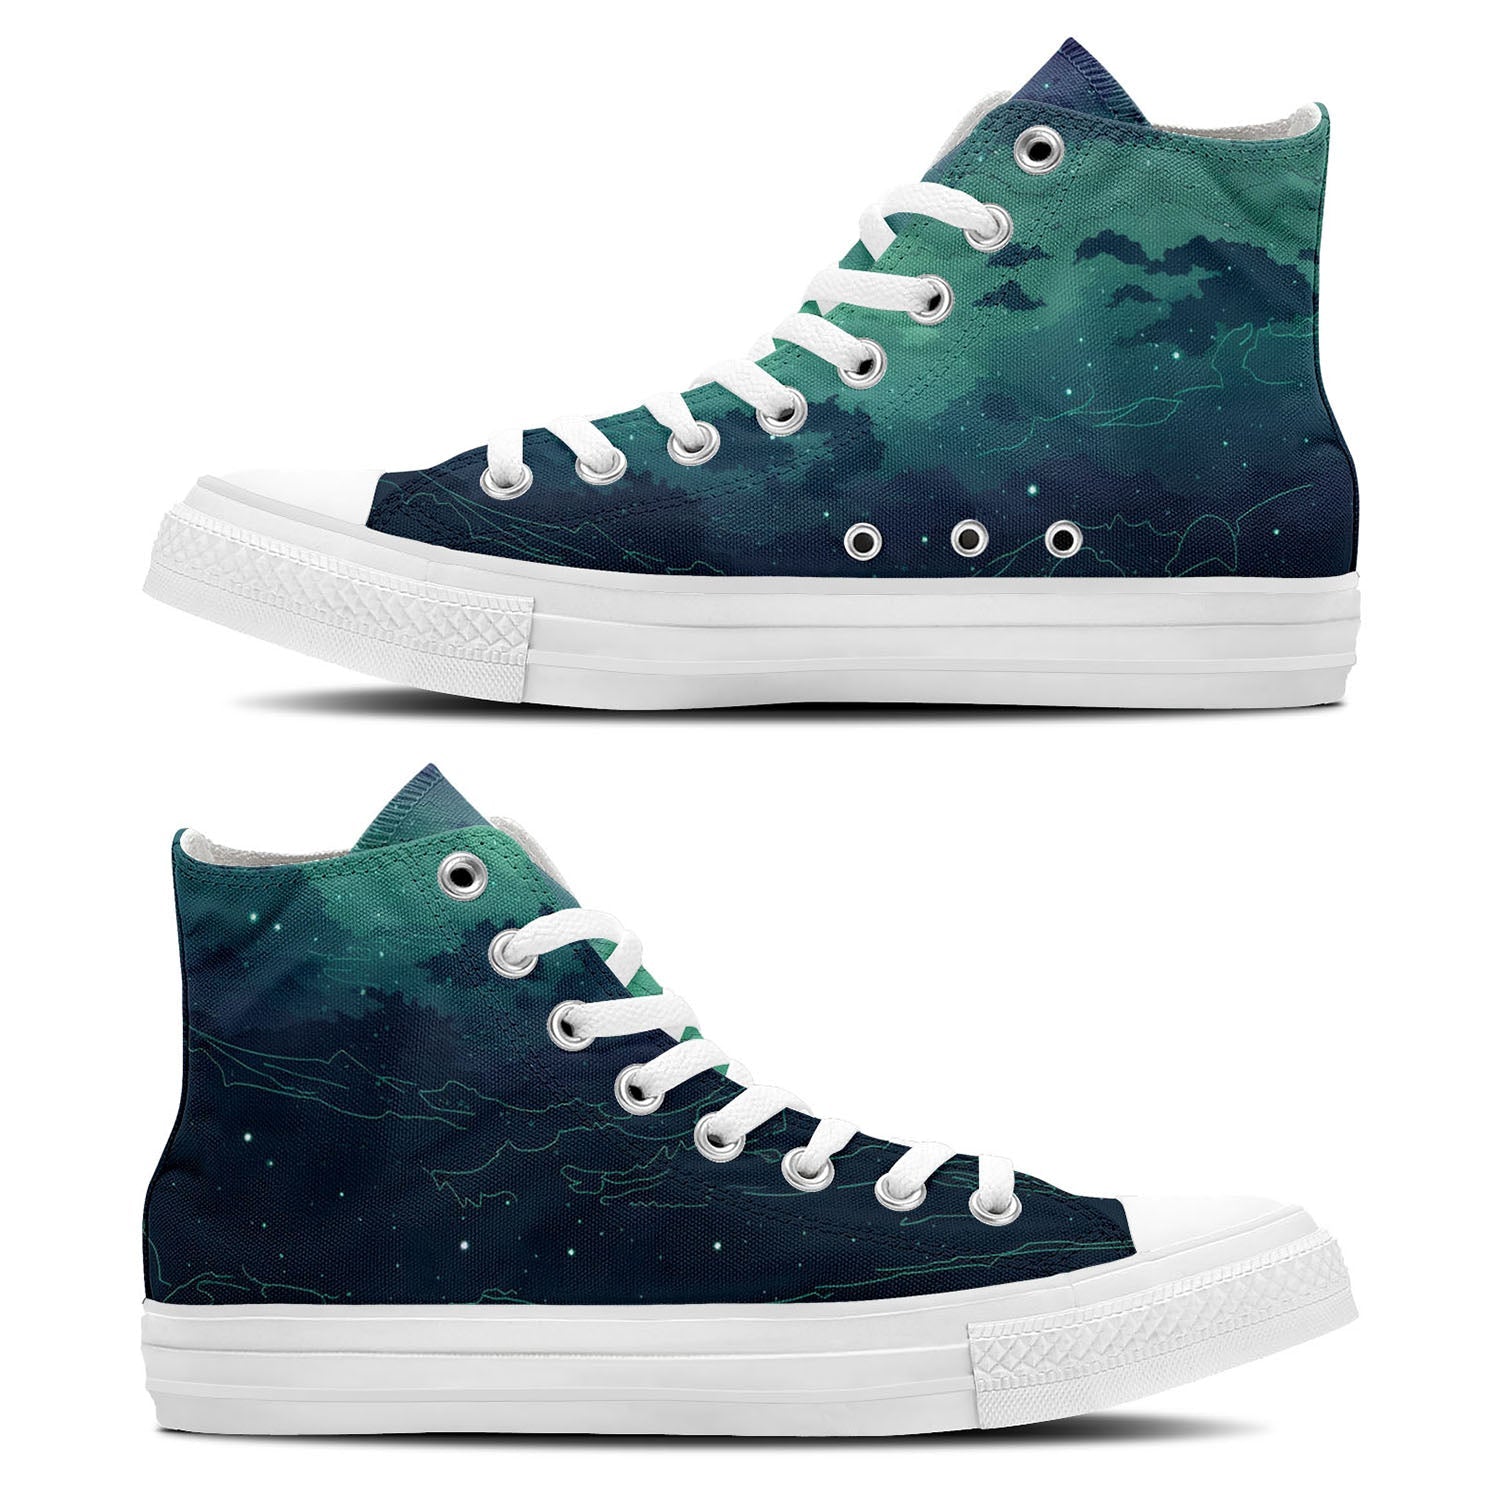 Nocturnal Chic: Central-High Canvas Shoes featuring Starlit Sky – A Stylish Choice for Both Genders